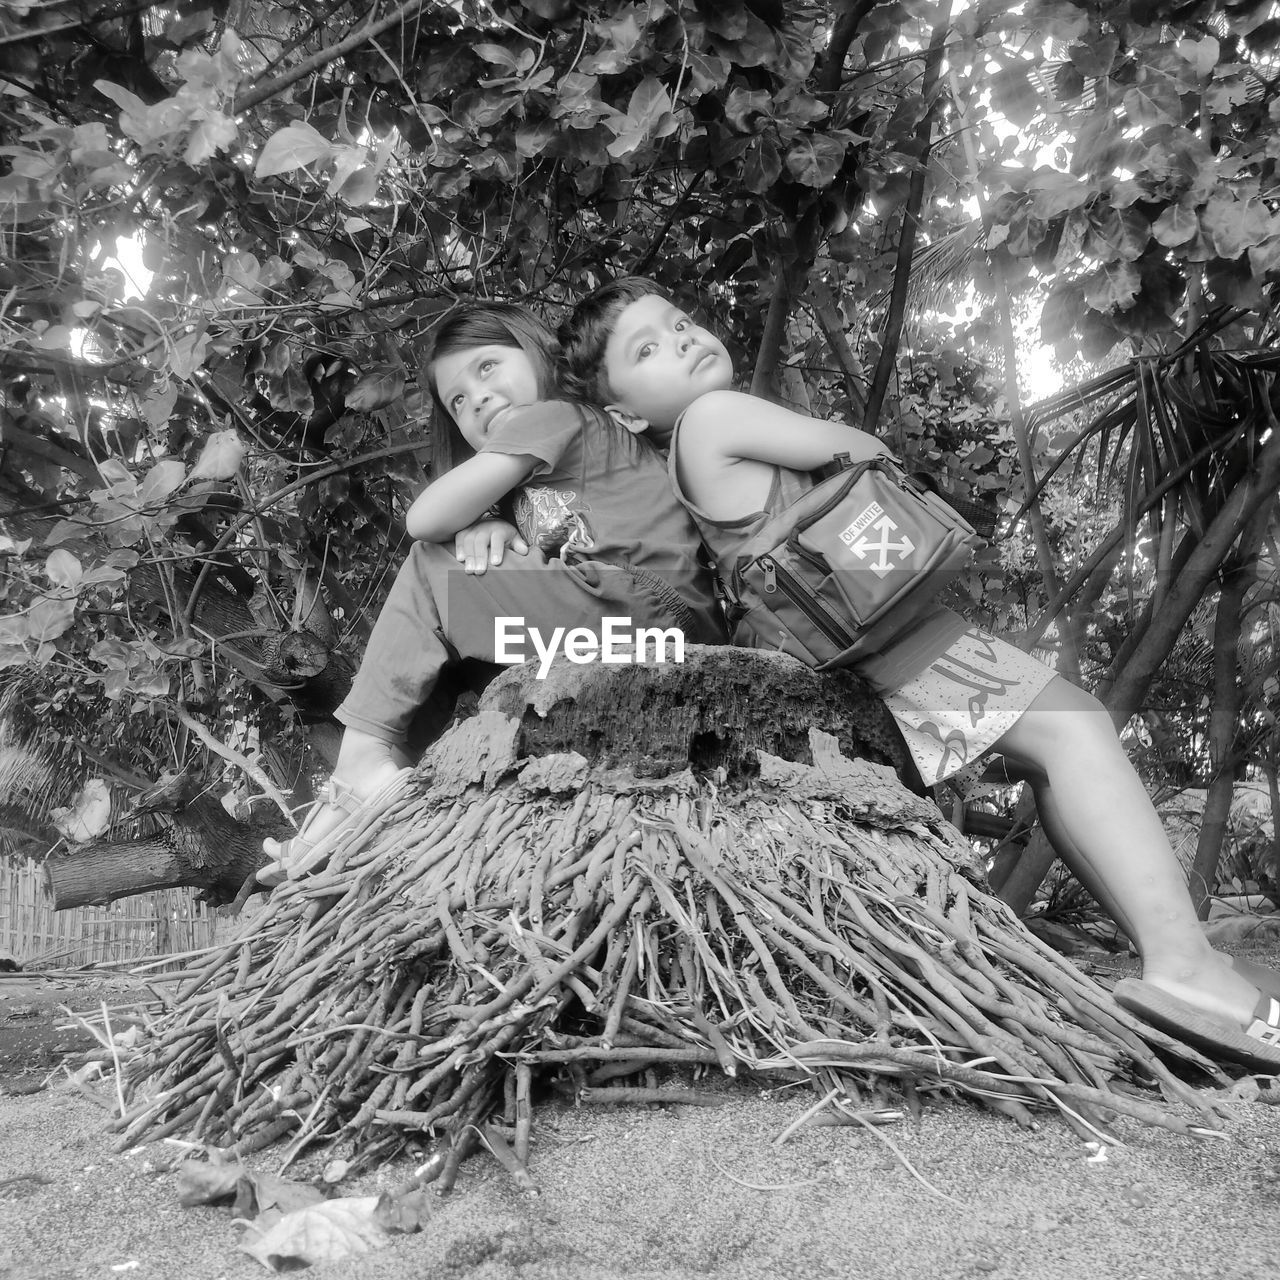 plant, black and white, tree, women, two people, monochrome photography, togetherness, nature, full length, adult, female, lifestyles, leisure activity, child, day, casual clothing, men, monochrome, young adult, childhood, sitting, emotion, land, outdoors, bonding, love, positive emotion, person, happiness, smiling, family, grass, front view